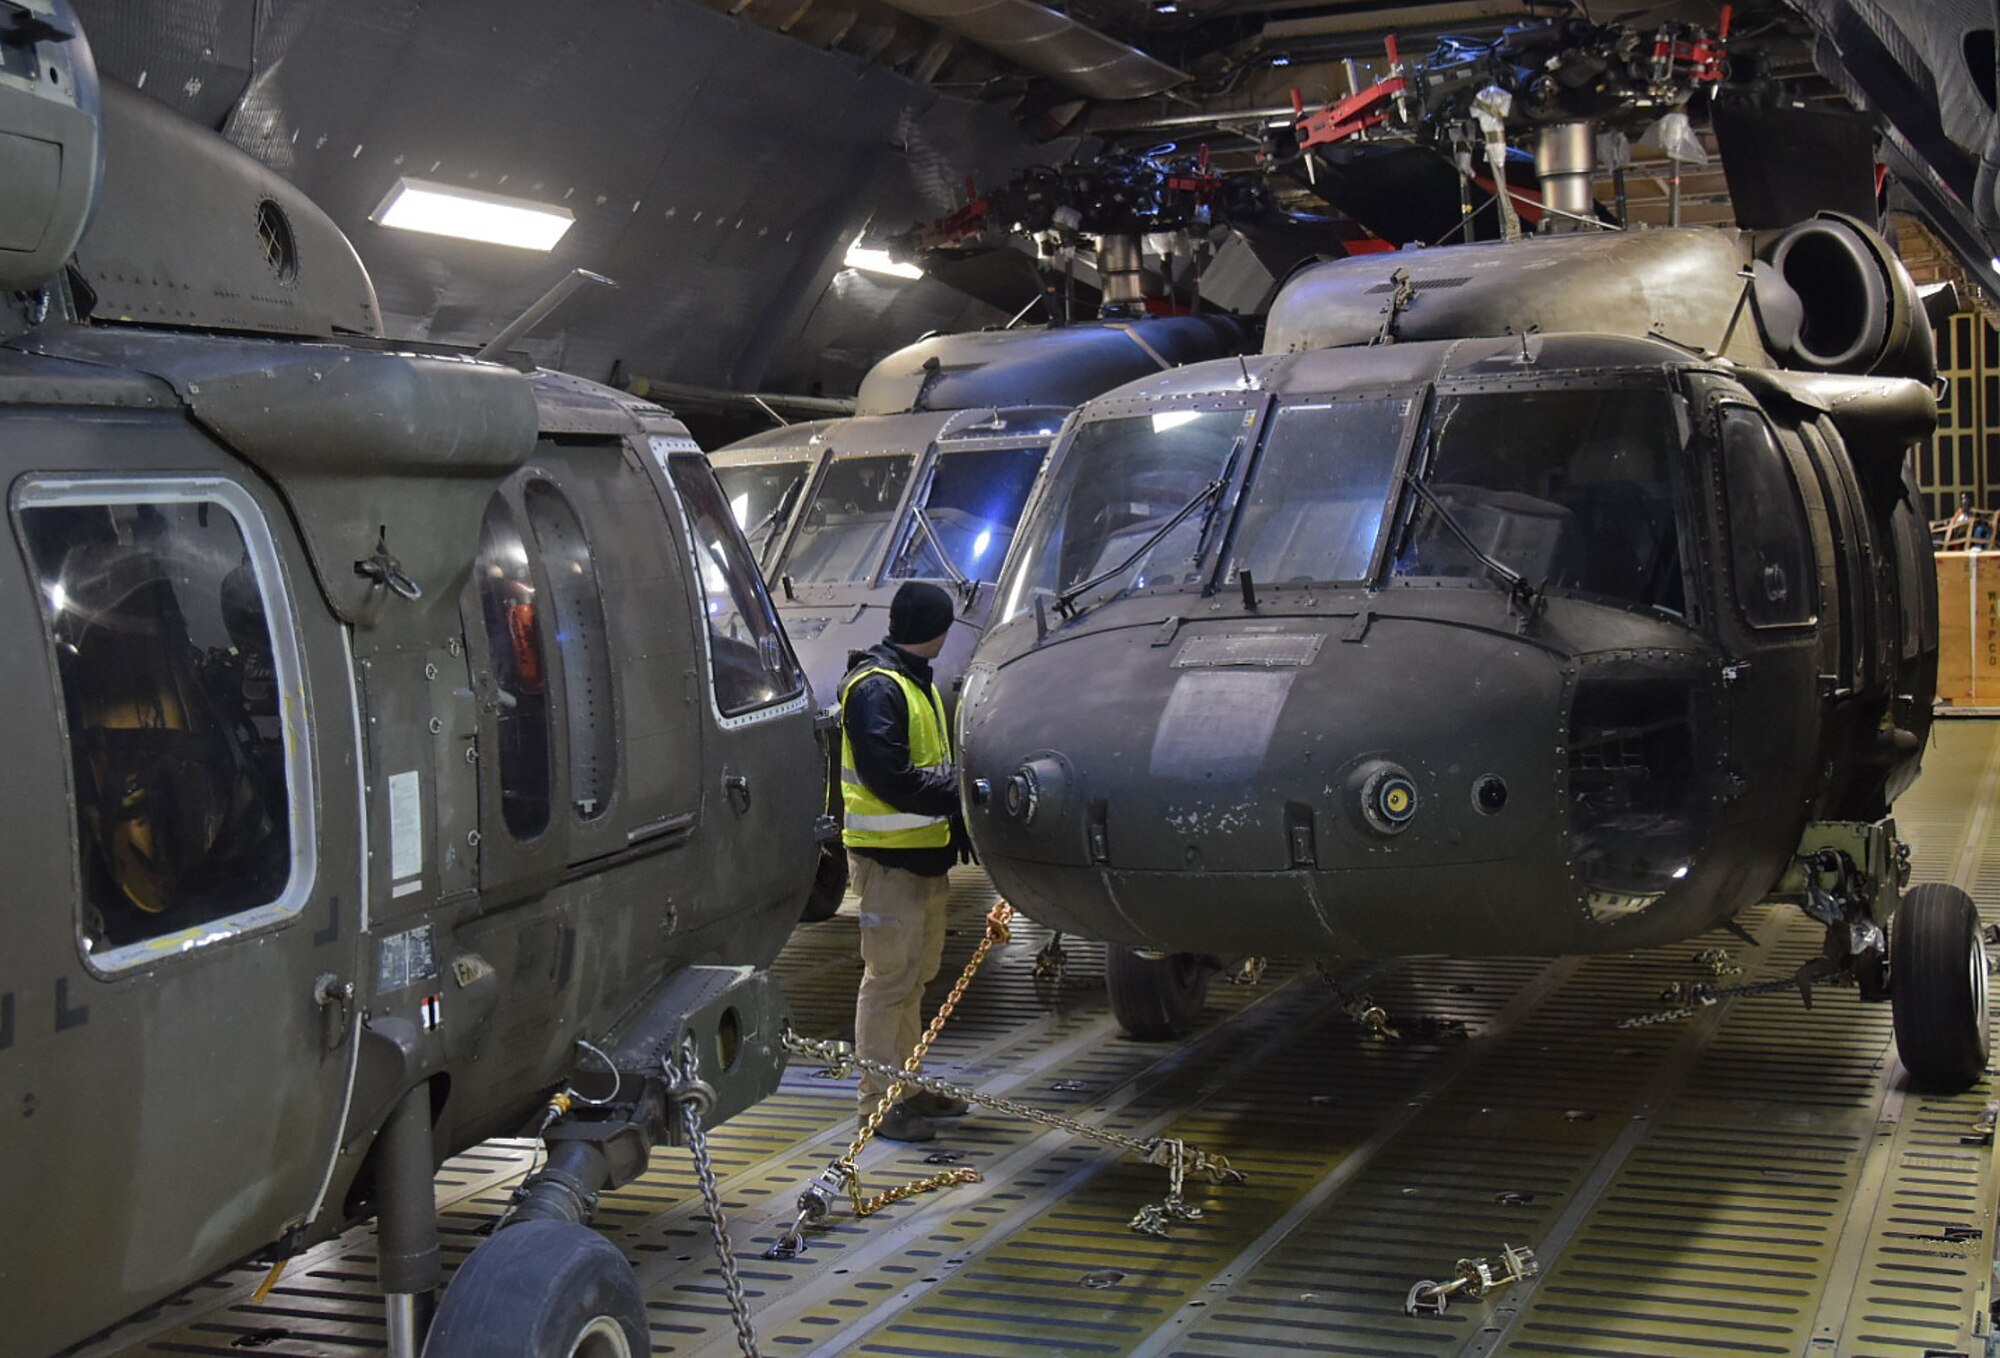 Three U.S. Army UH-60 Blackhawk helicopters belonging to the 10th Combat Aviation Brigade from Ft. Drum, N.Y. are secured and readied for transport on an Air Mobility Command C-5M Super Galaxy on Feb., 27, 2017.  The helicopters and 22 Army Soldiers were flown by Air Force Reserve Command's 68th Airlift Squadron to Riga, Latvia as part of Operation Atlantic Resolve. (U.S. Air Force photo/Tech. Sgt. Carlos J. Trevino)